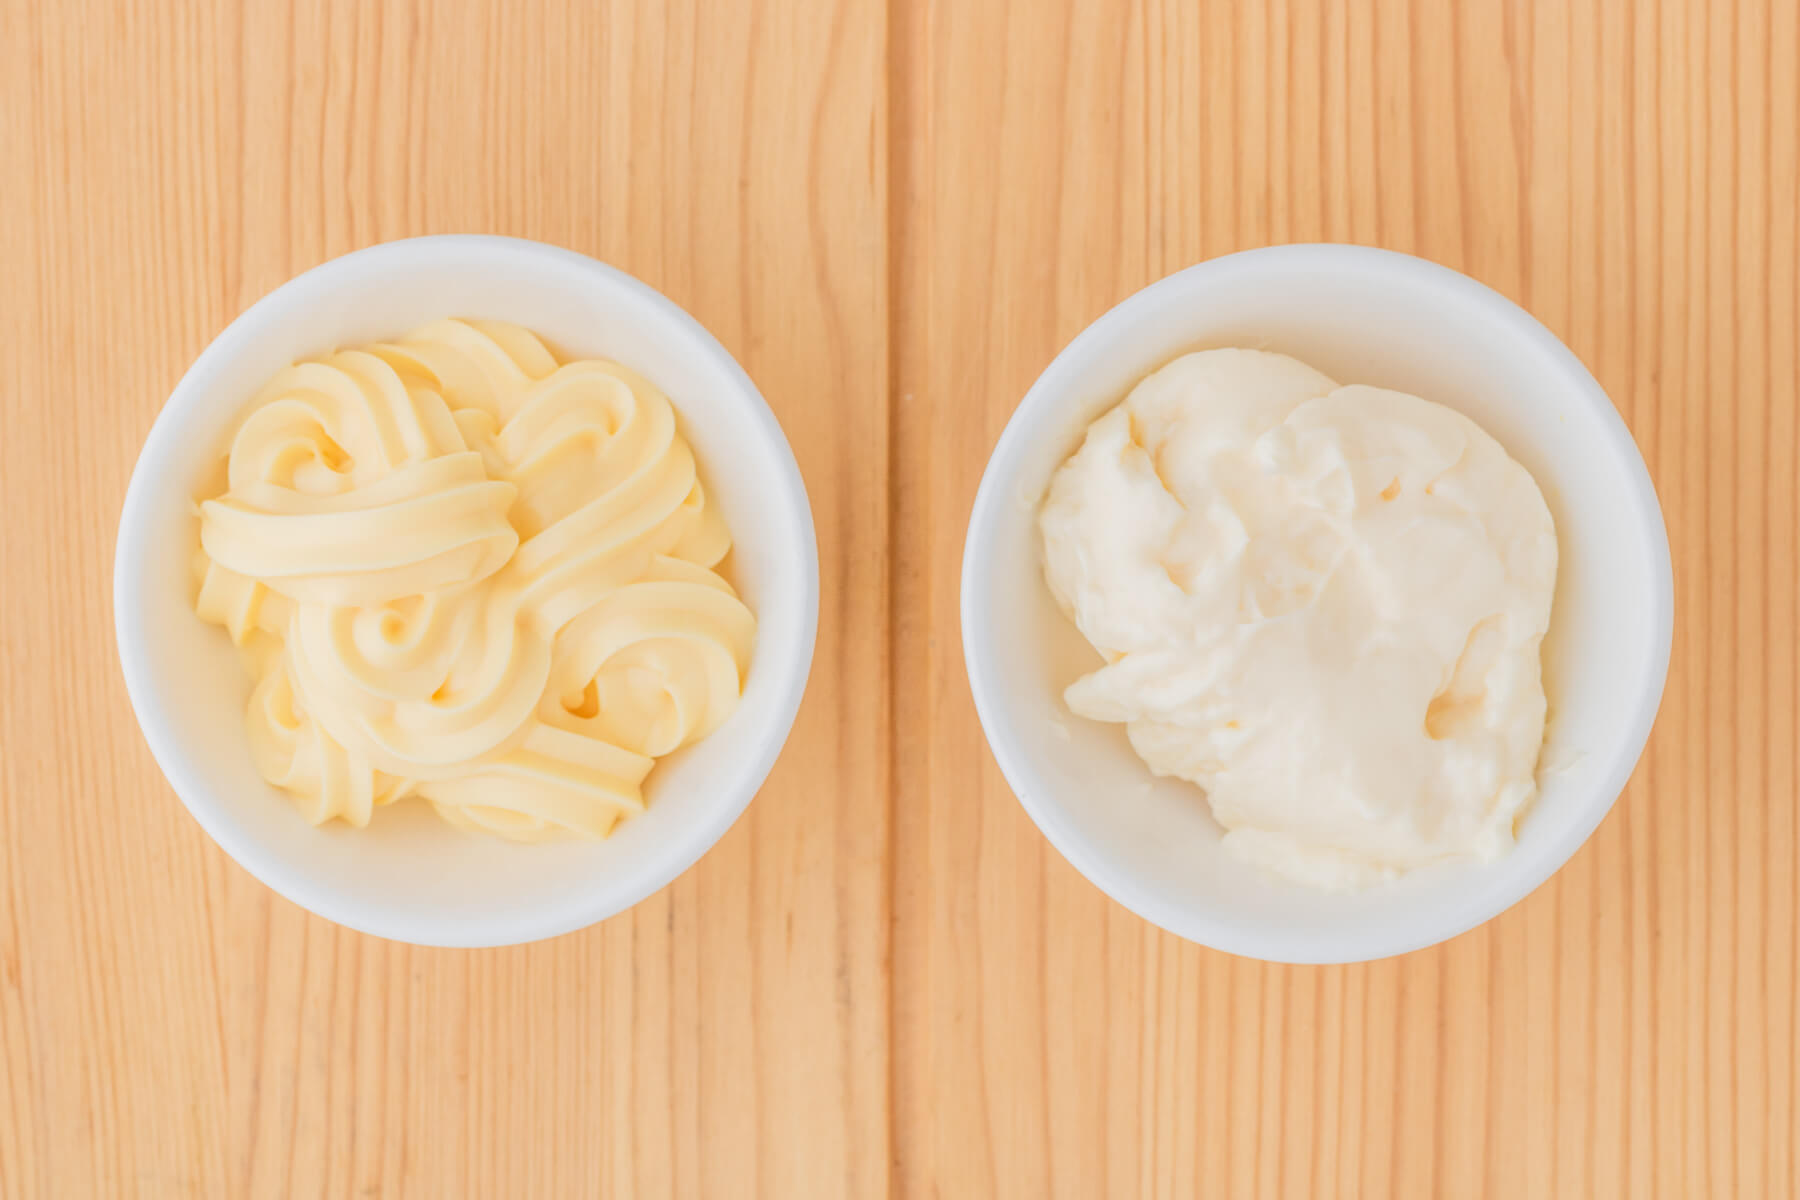 Two white bowls filled mayonnaise showing the difference in colour and texture between Kewpie Mayonnaise and Hellman's Mayonnaise.